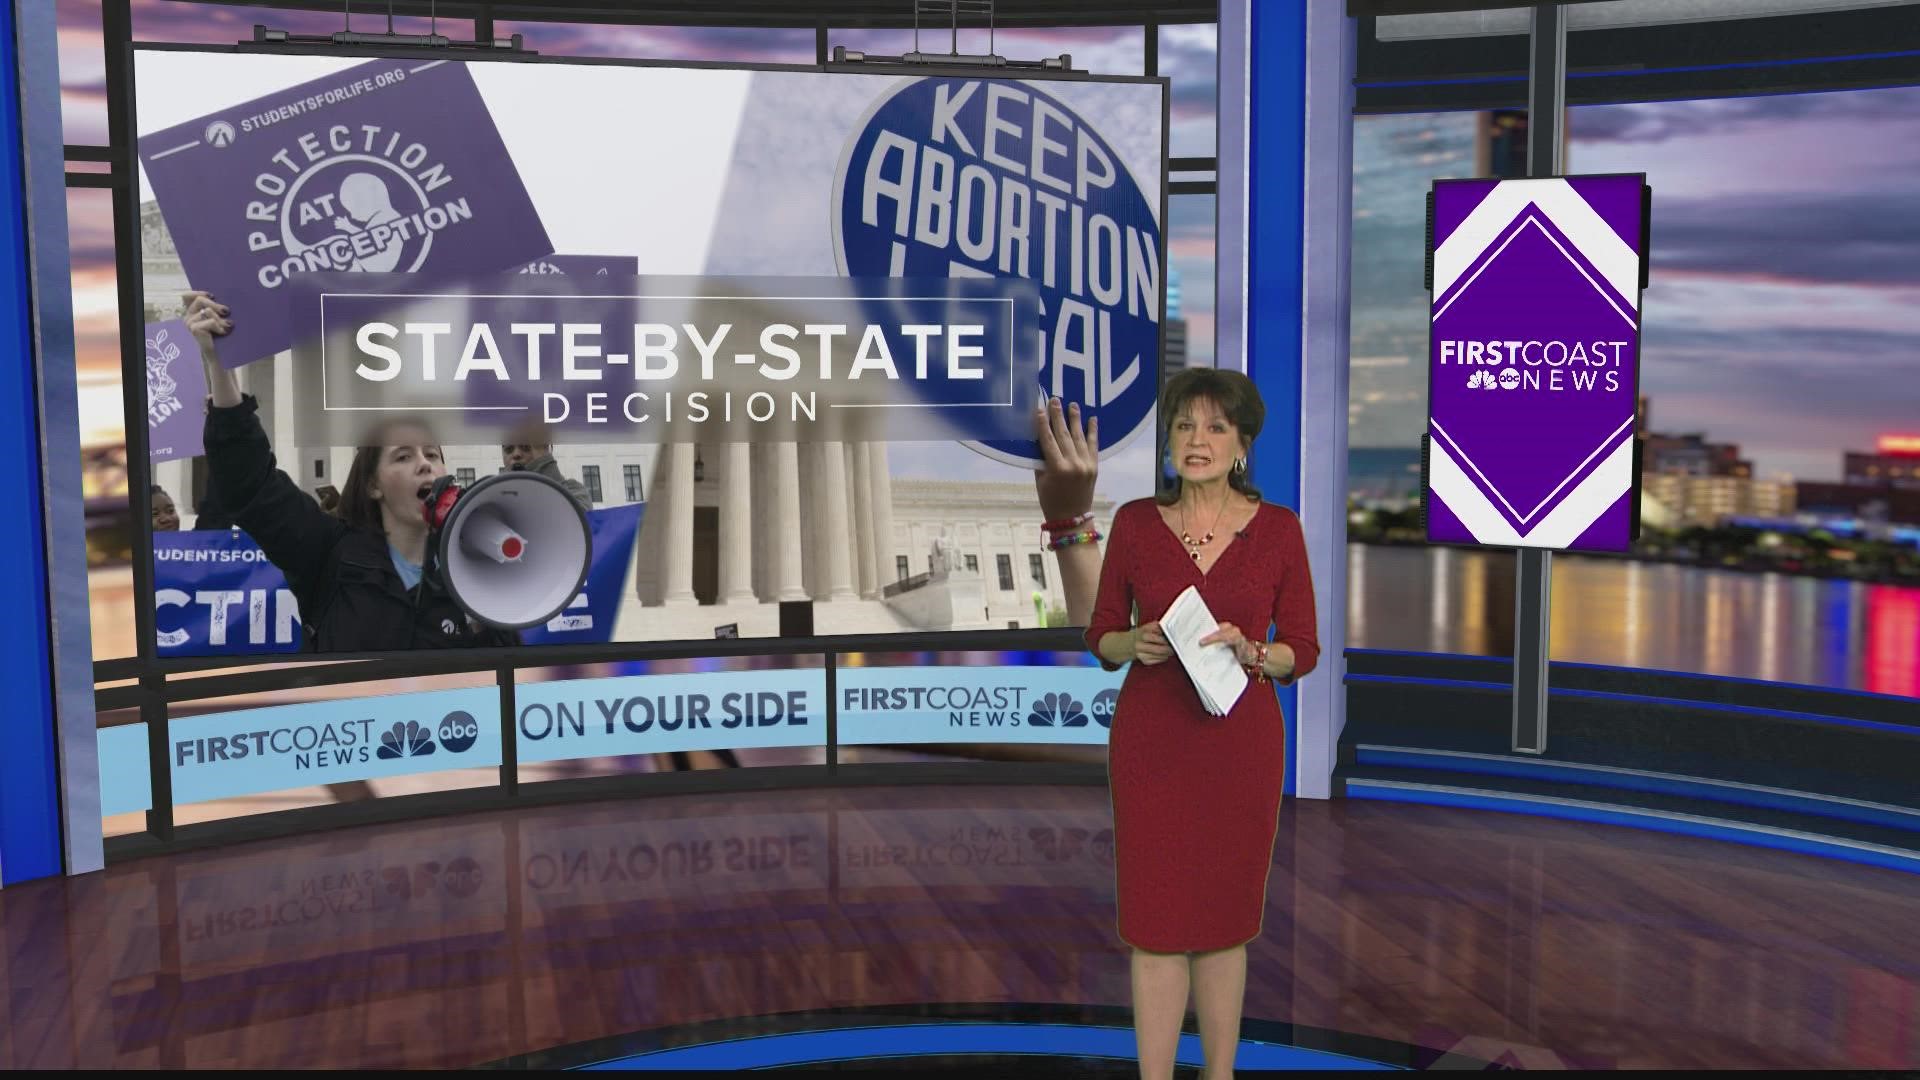 Almost half of US states would likely move to ban abortion, according to a study.